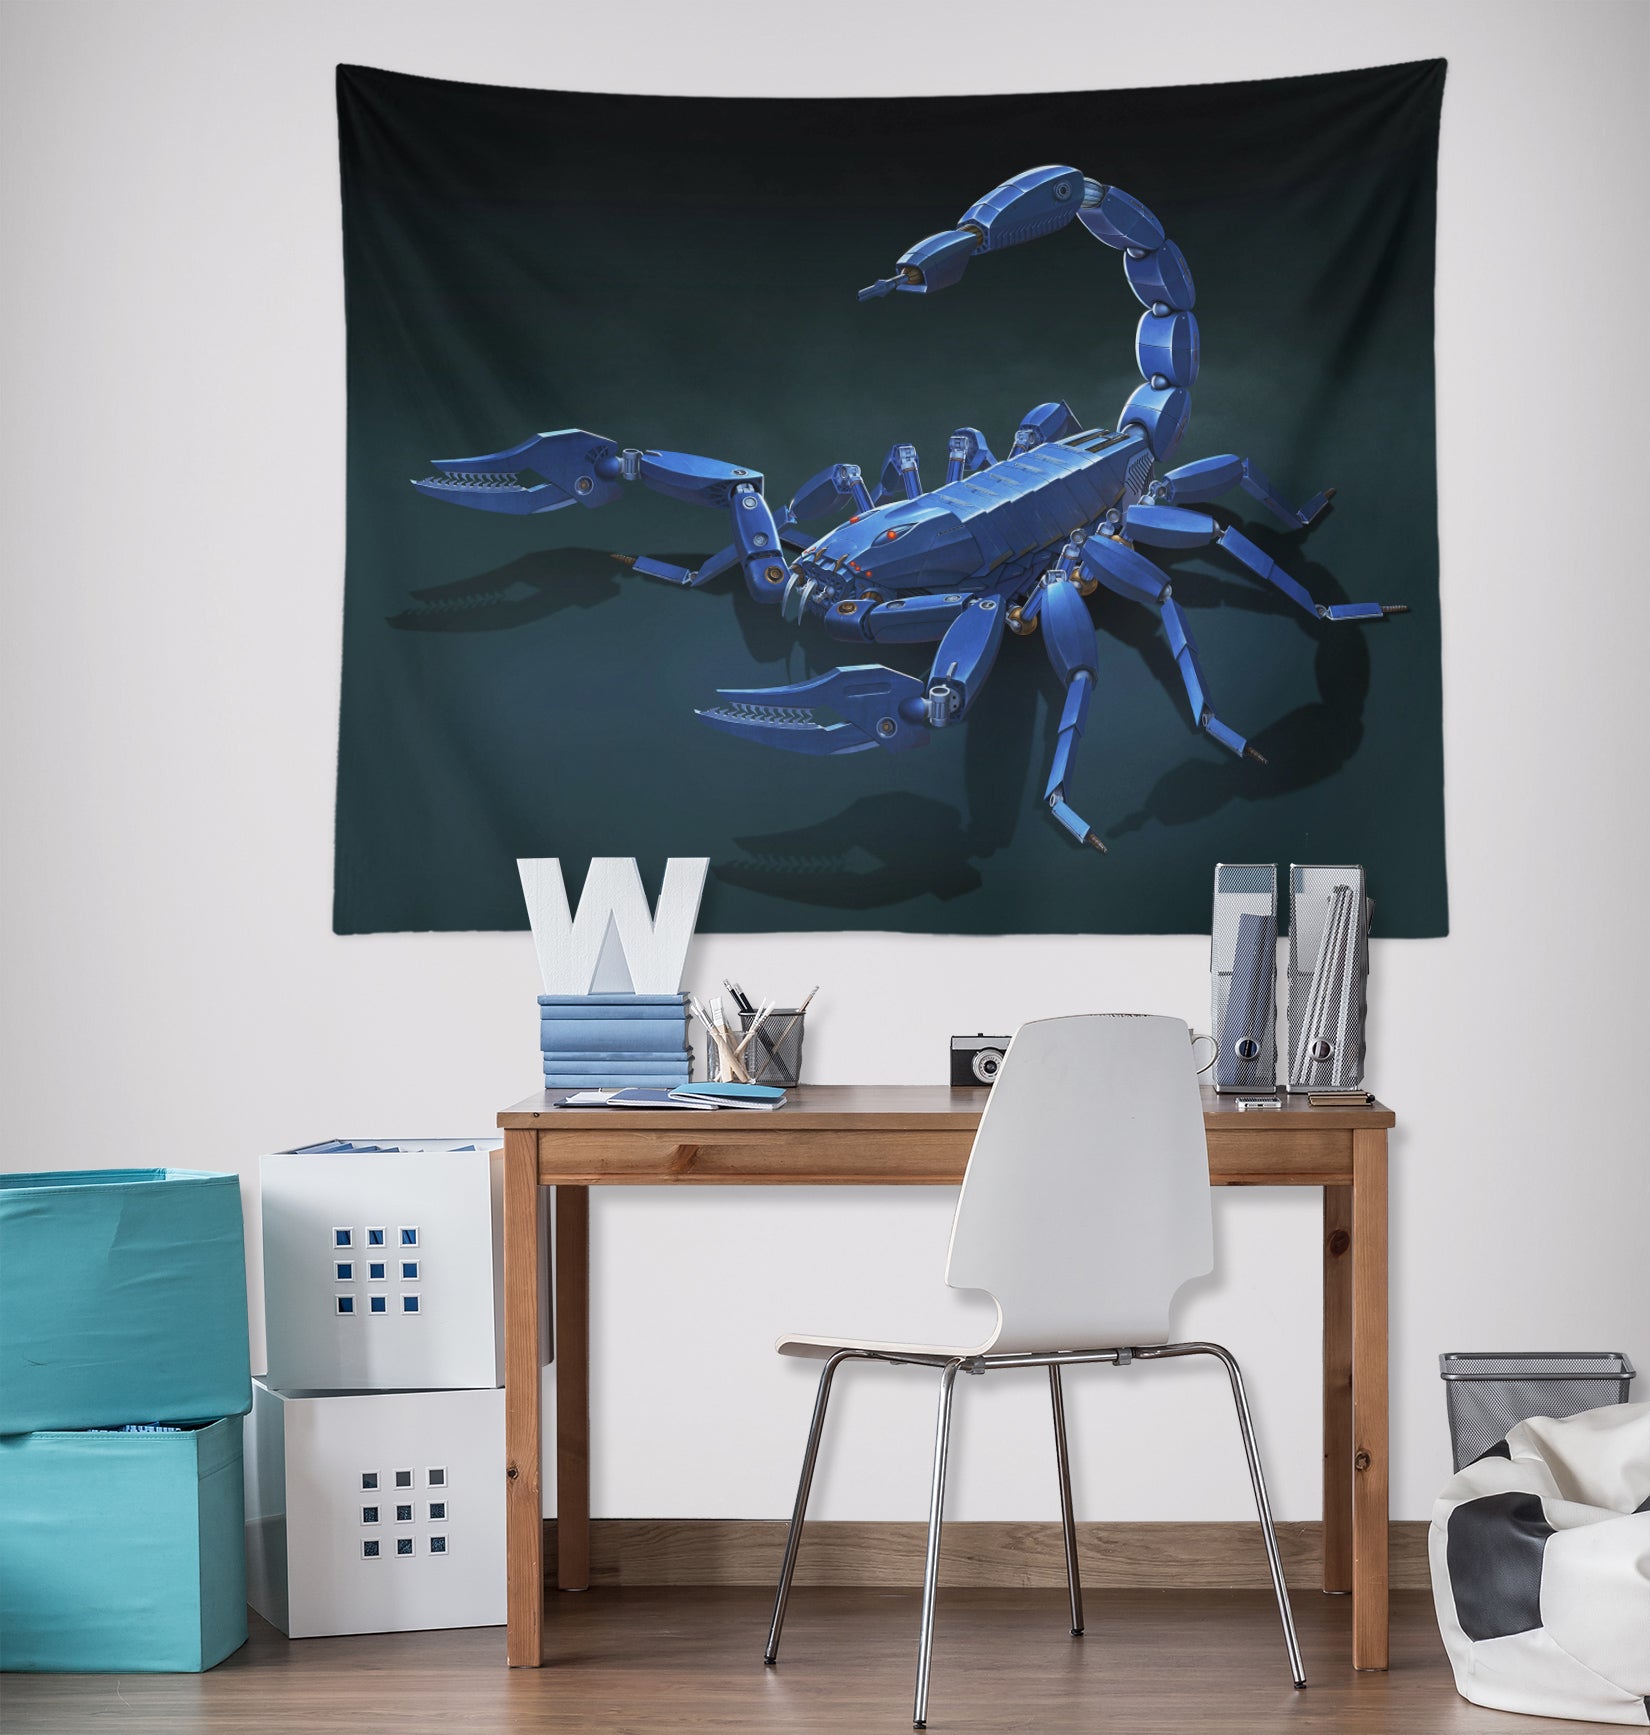 3D Scorpion 116193 Vincent Tapestry Hanging Cloth Hang